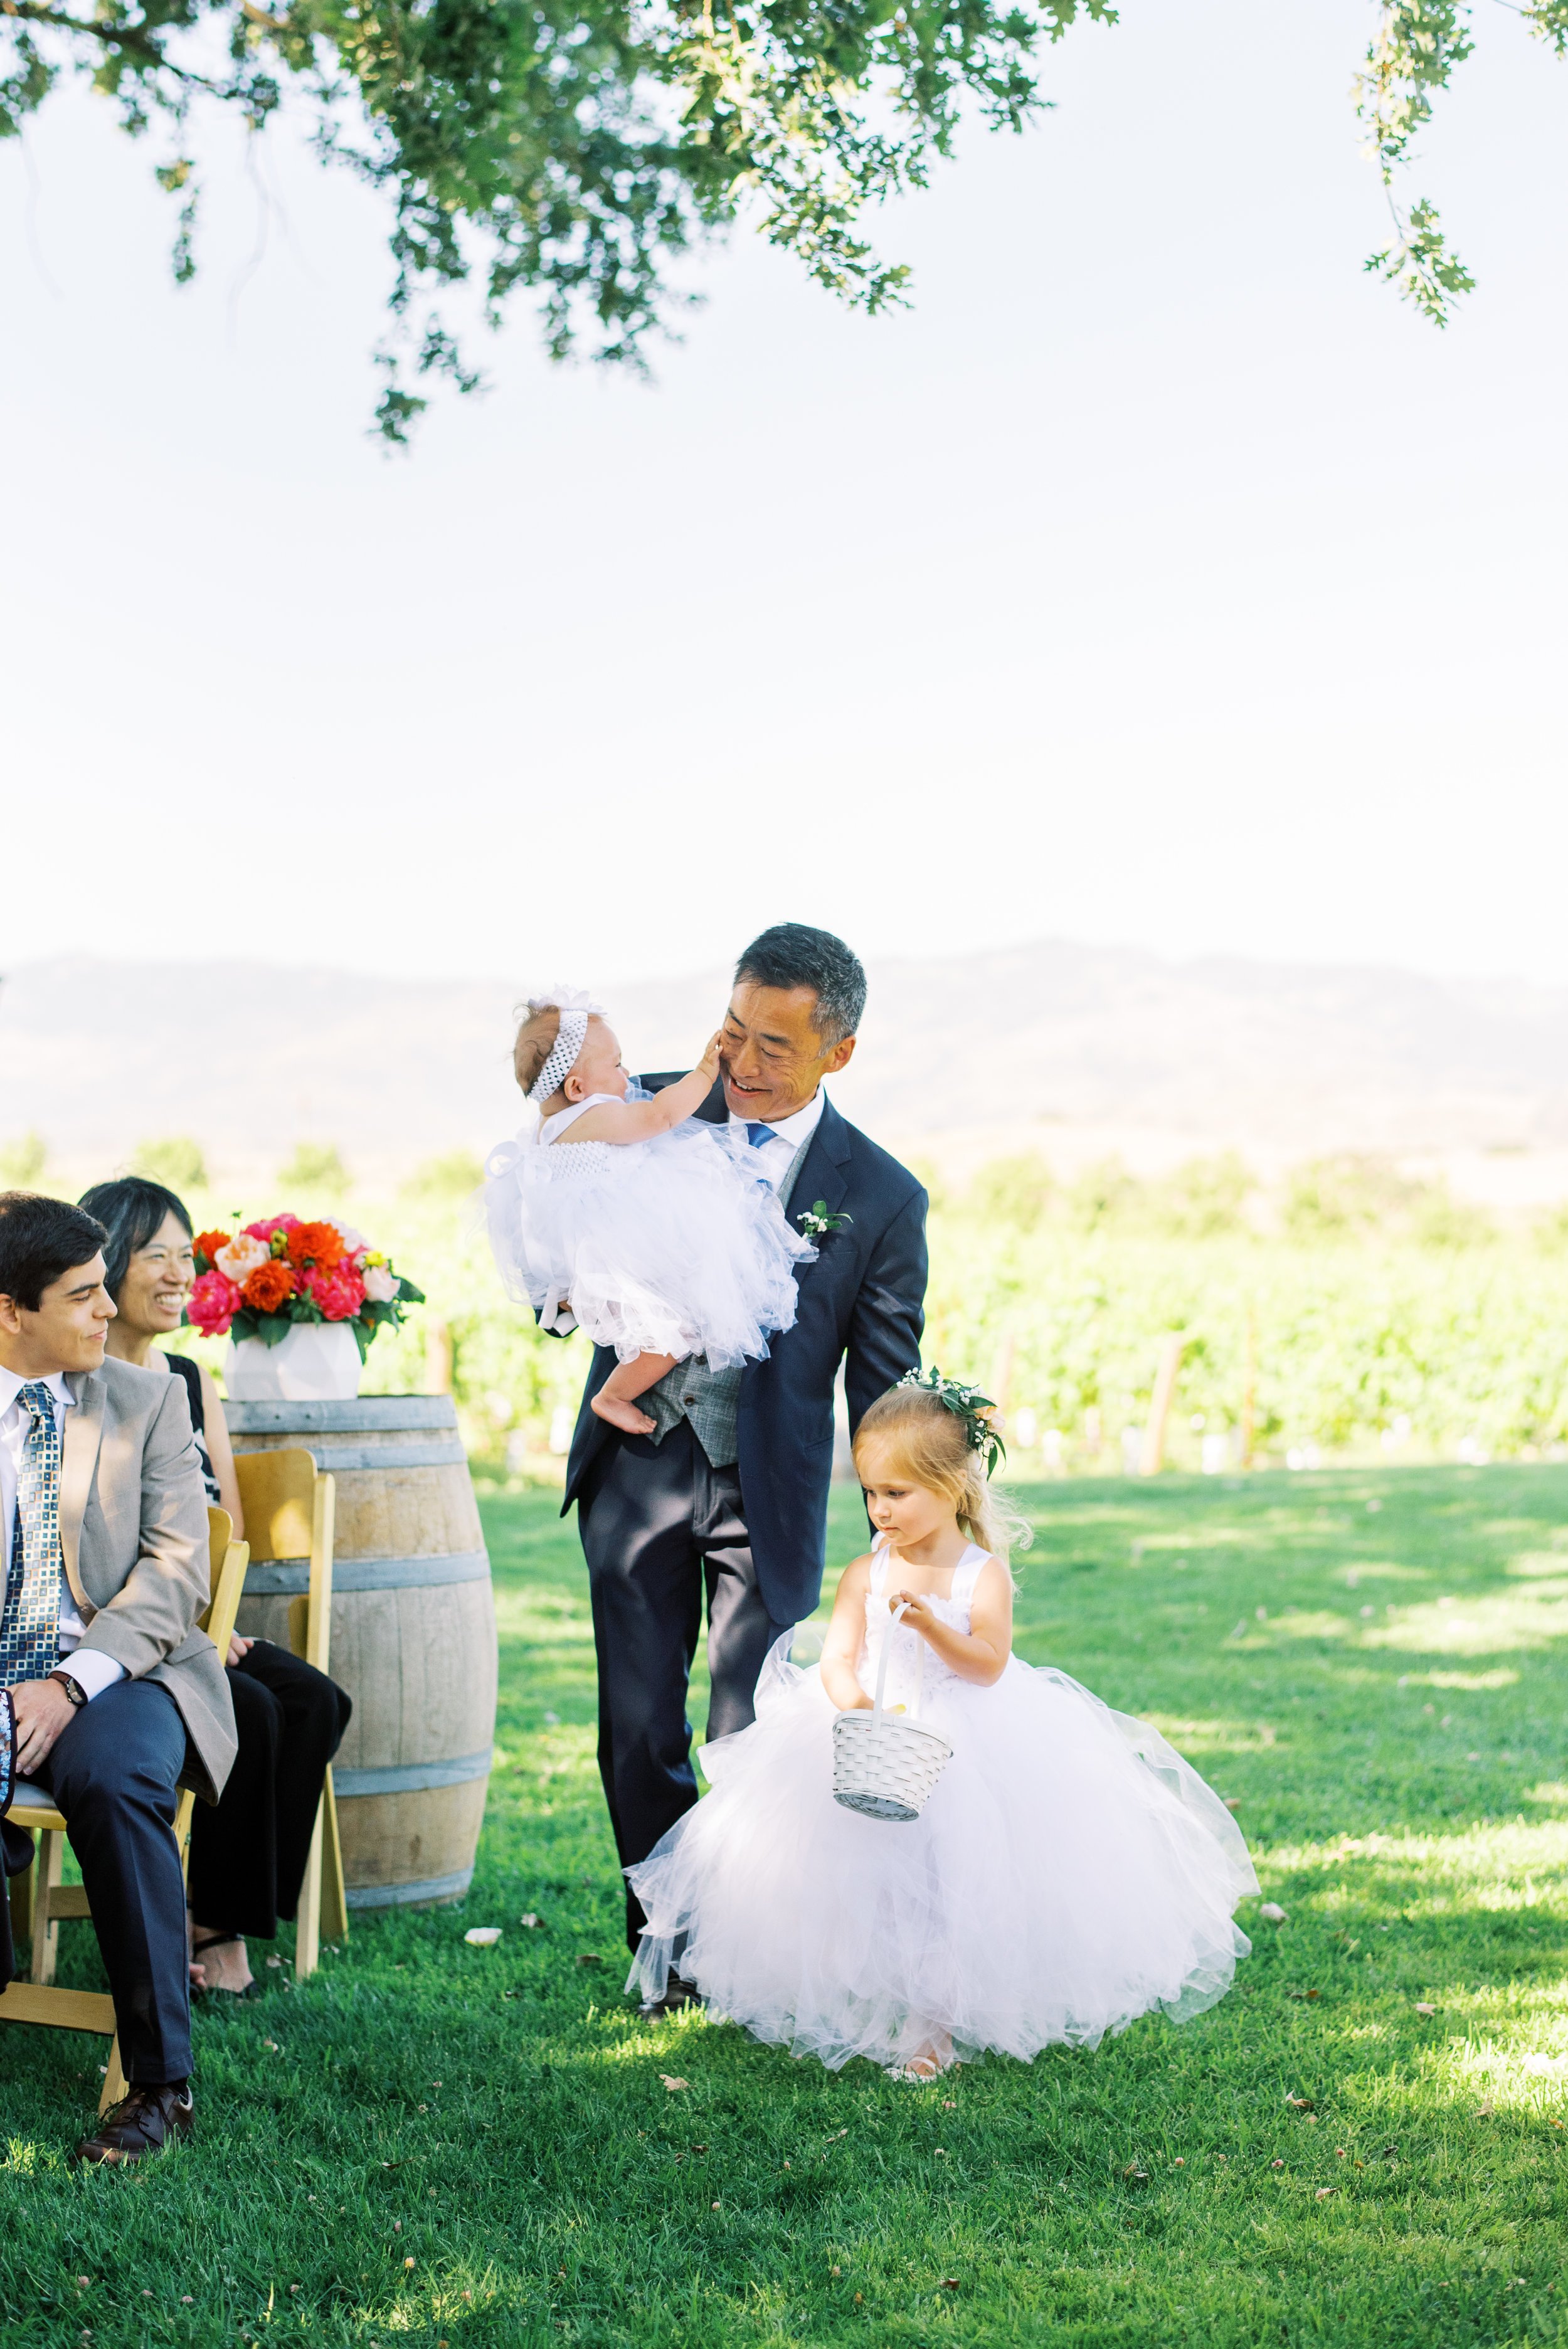 www.santabarbarawedding.com | Loveridge Photography | Gainey Vineyard | Amber Alyse Events | Besame Floral | Bright Event Rentals | Father of Groom Leads Flower Girls Down the Aisle